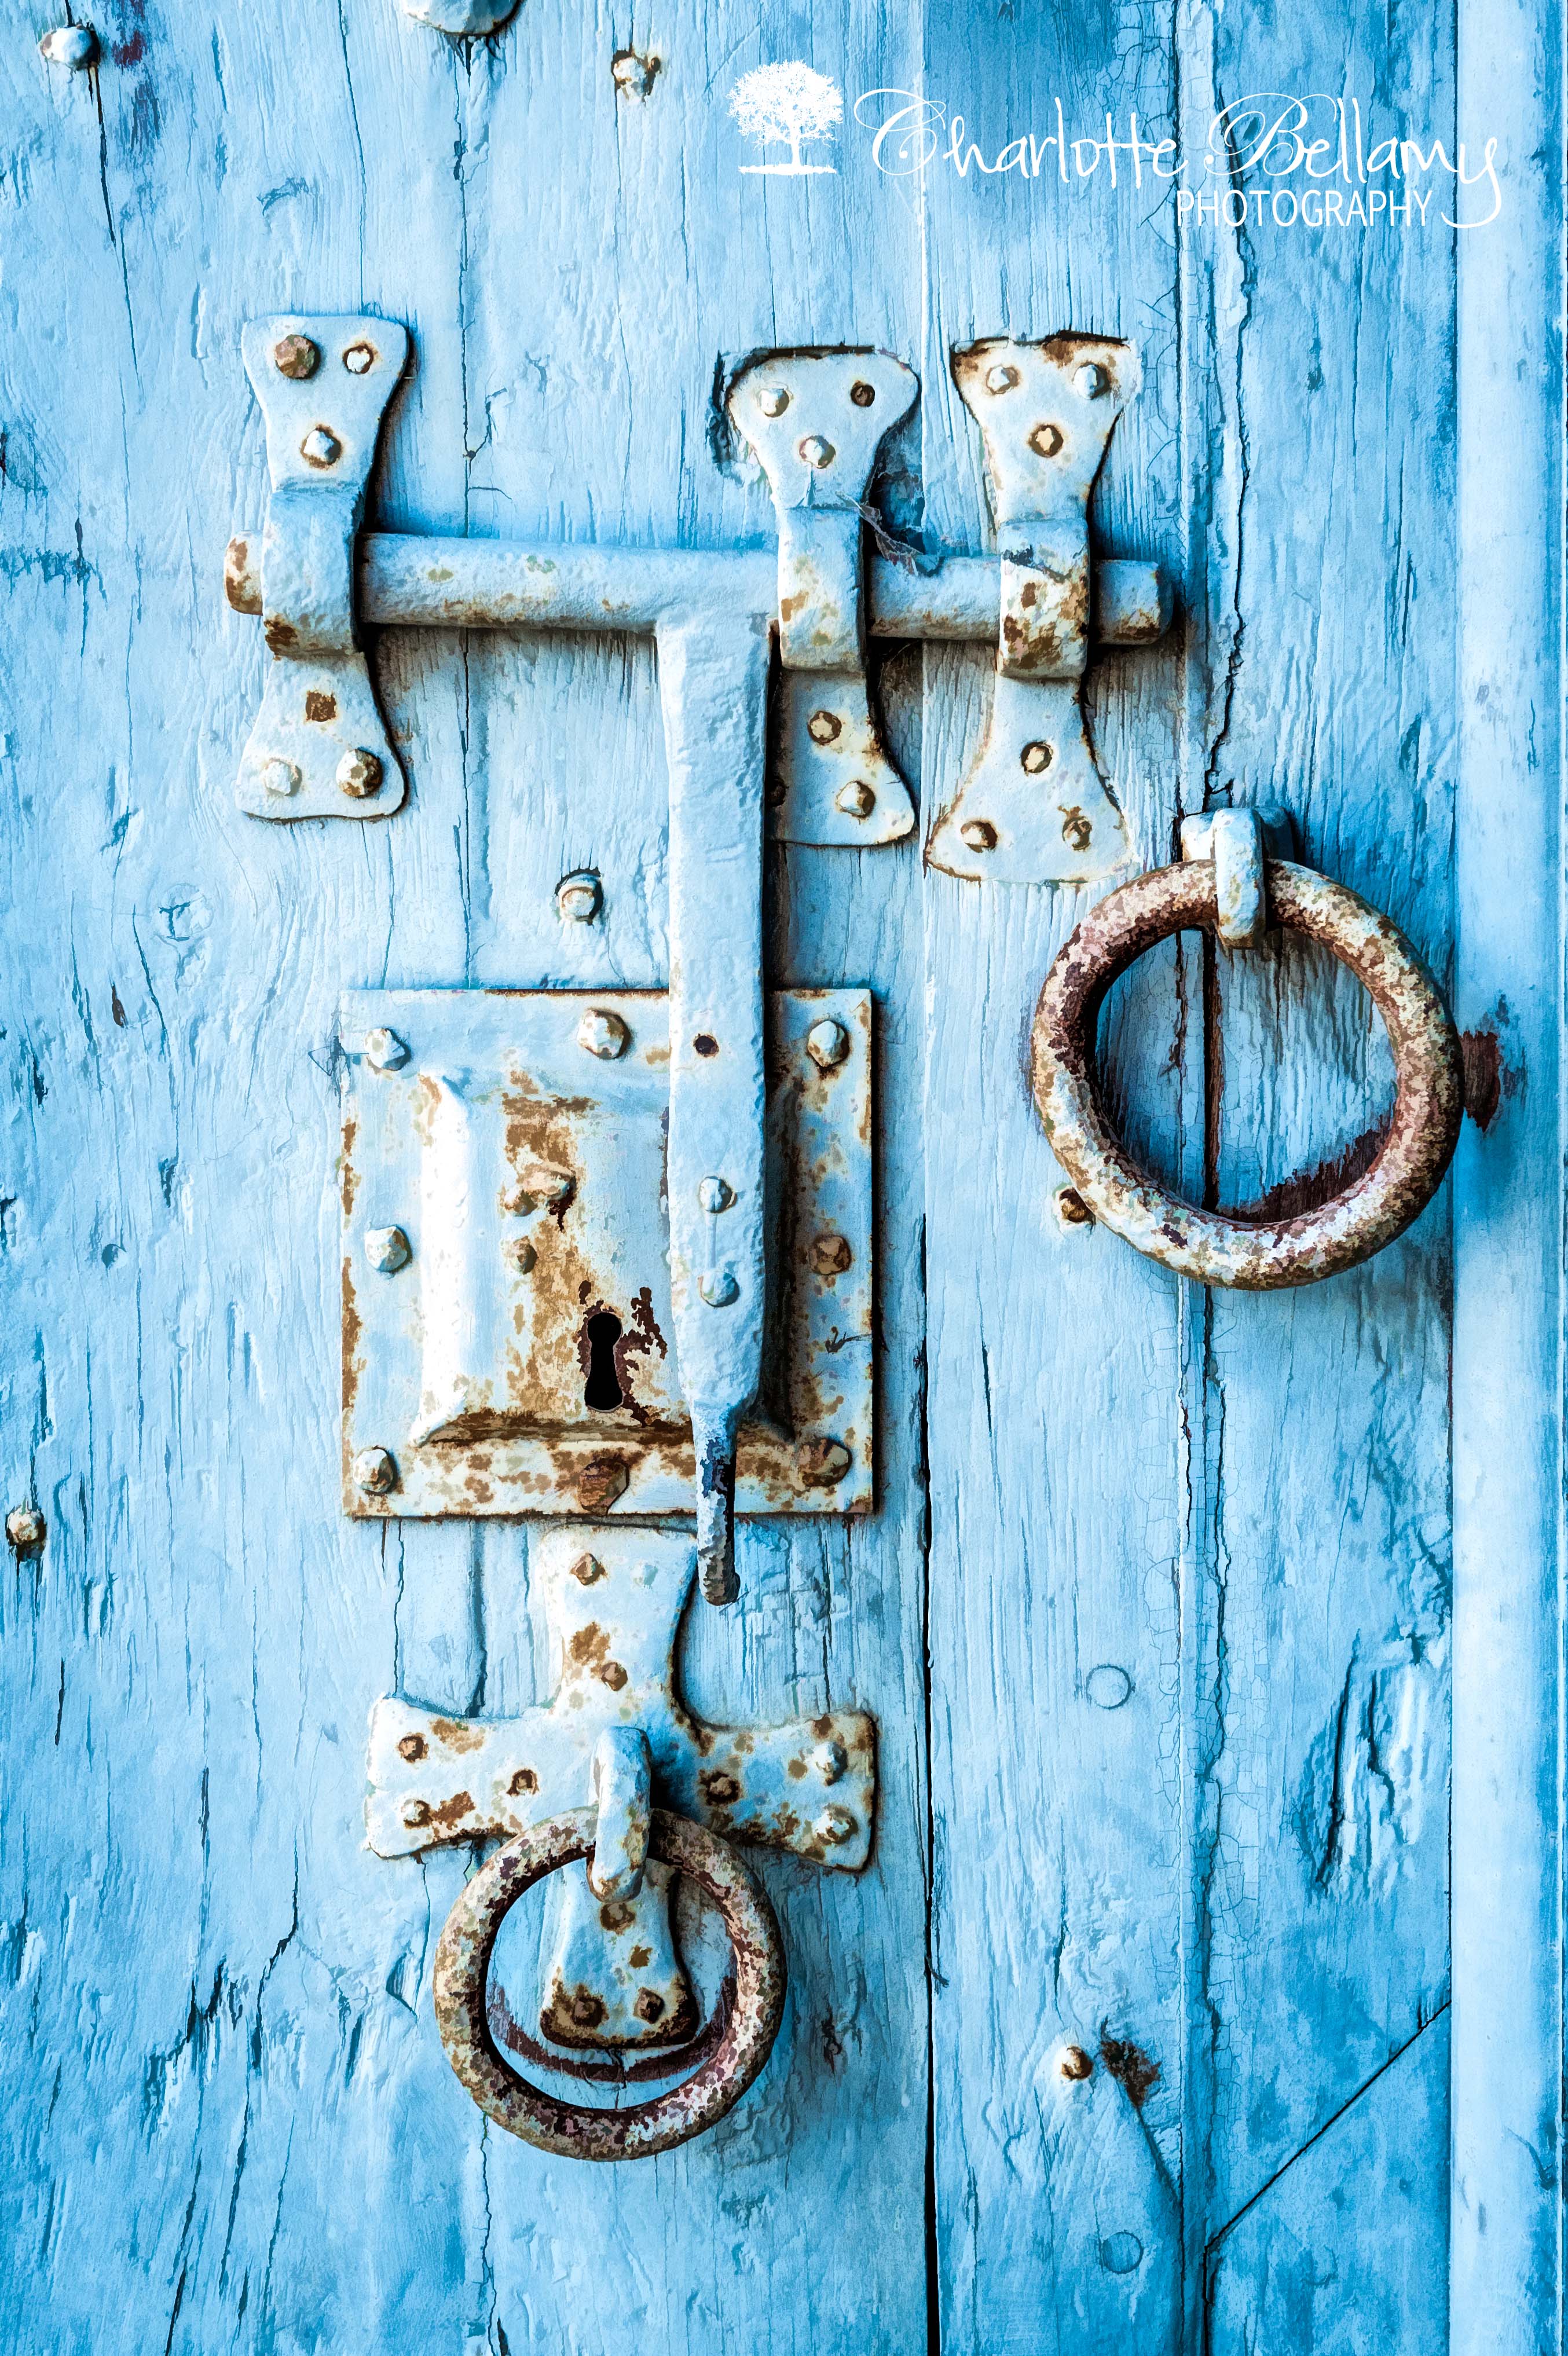 Charlotte Bellamy Photography | An old blue door with a rusty lock